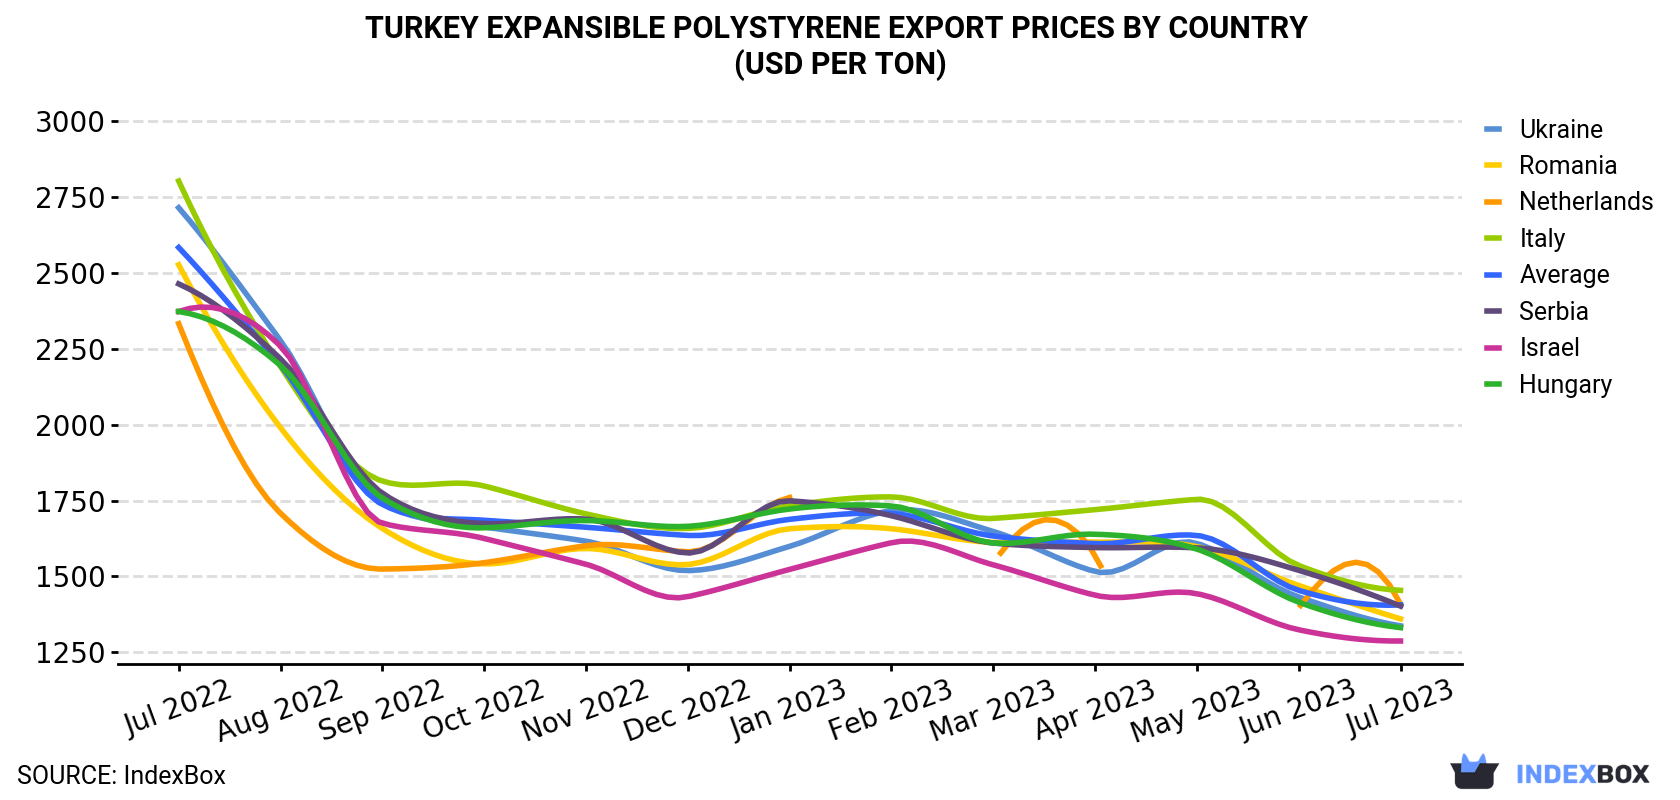 Turkey Expansible Polystyrene Export Prices By Country (USD Per Ton)